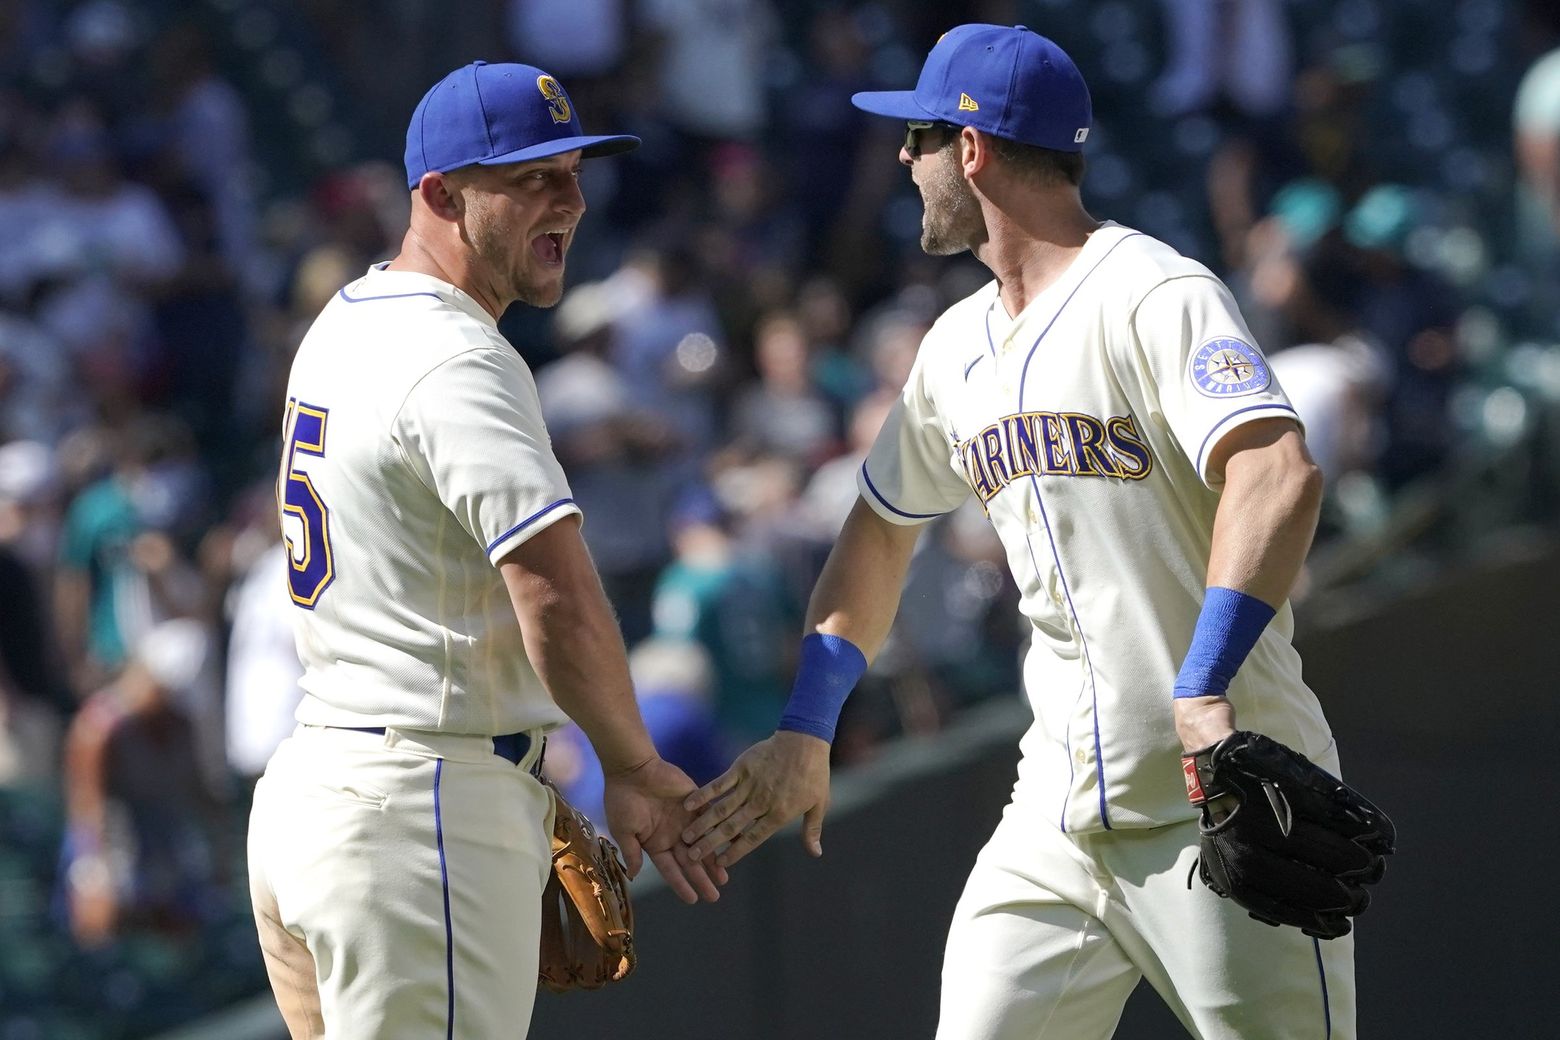 RUMOR: The in-demand asset the Mariners could move ahead of trade deadline  to acquire rental starter